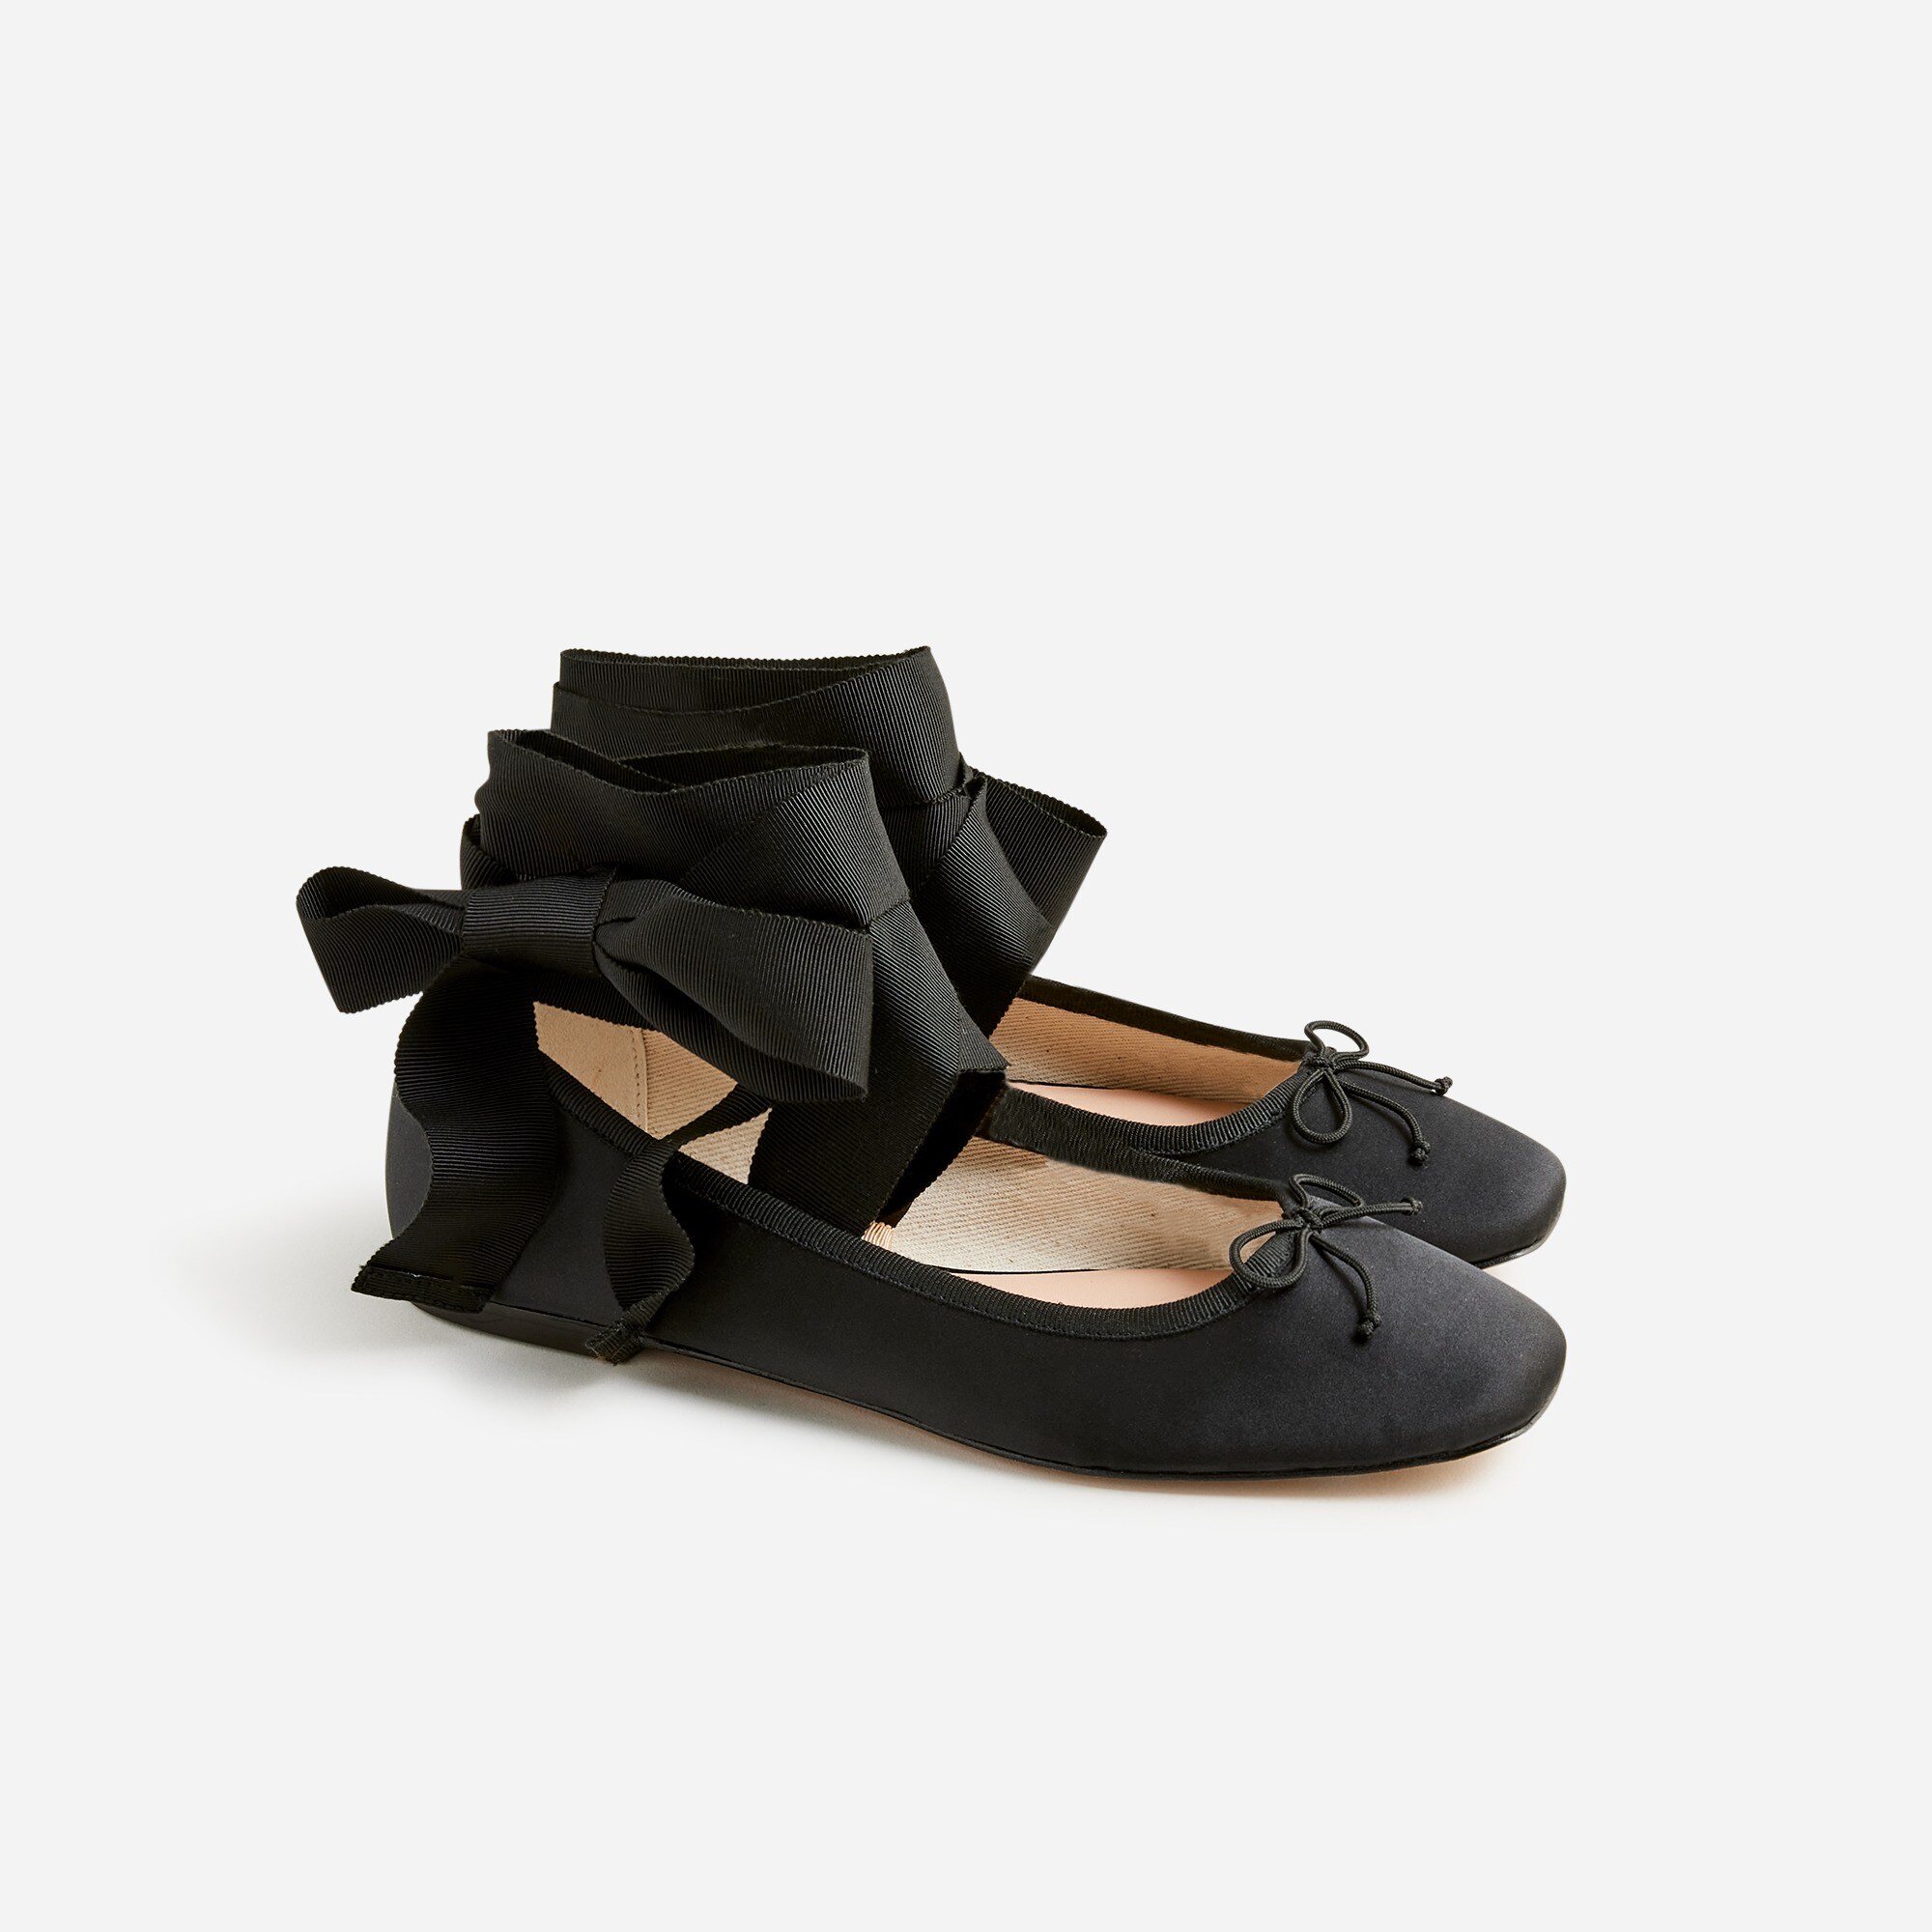  Quinn lace-up ballet flats in satin